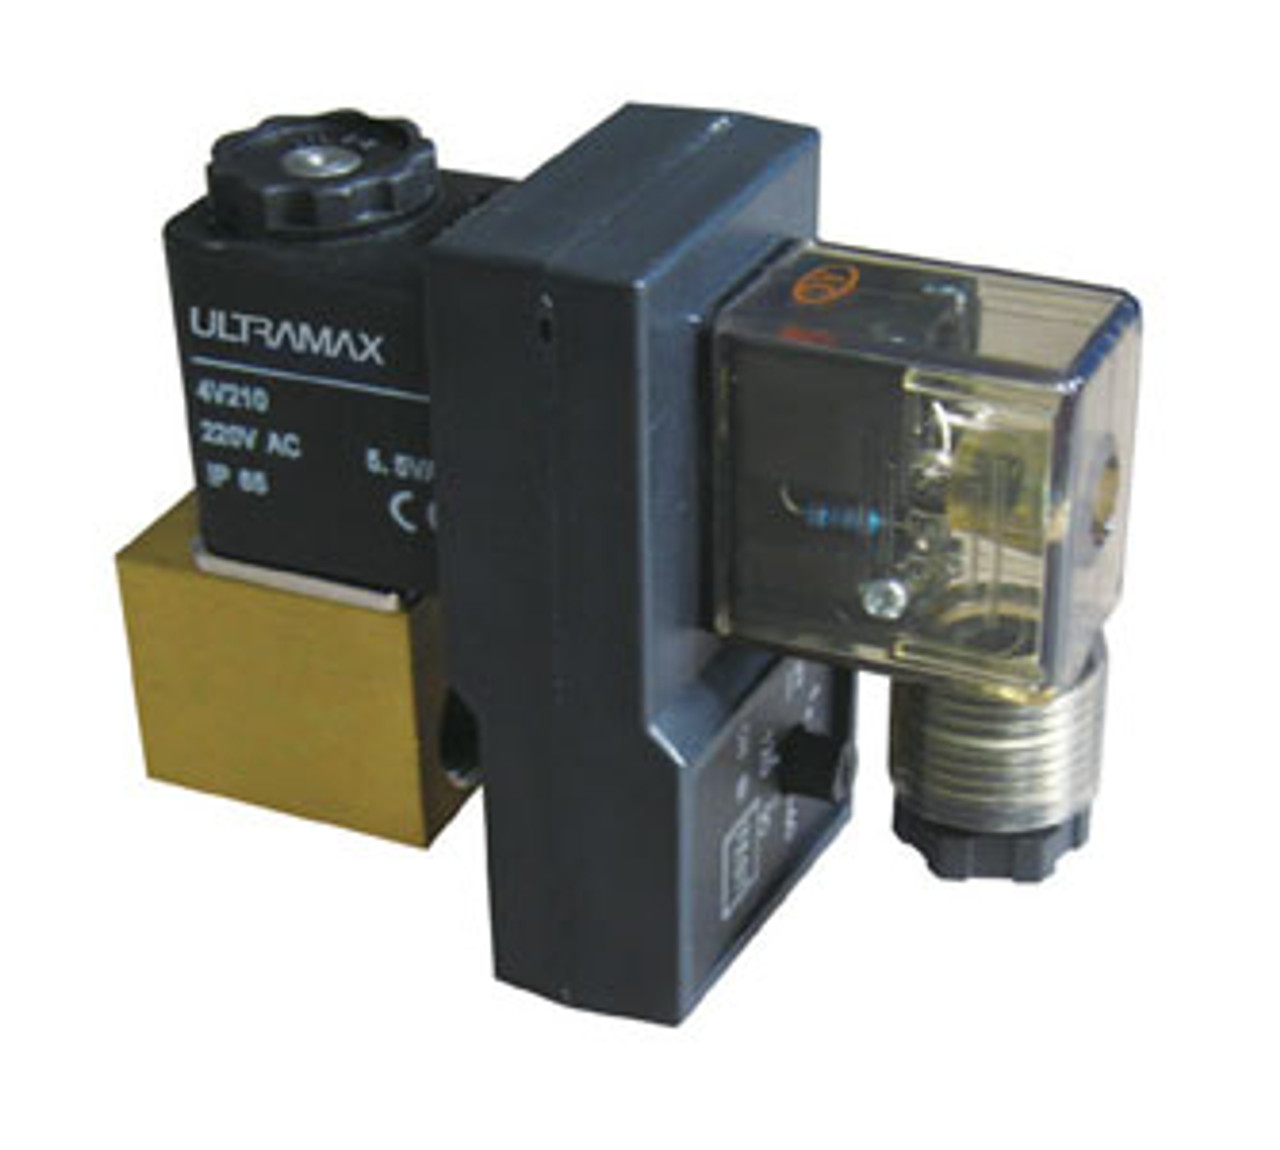 Electronic Condensate BSP Drain Valve (Compact) 1/4" x 2 x 24V AC